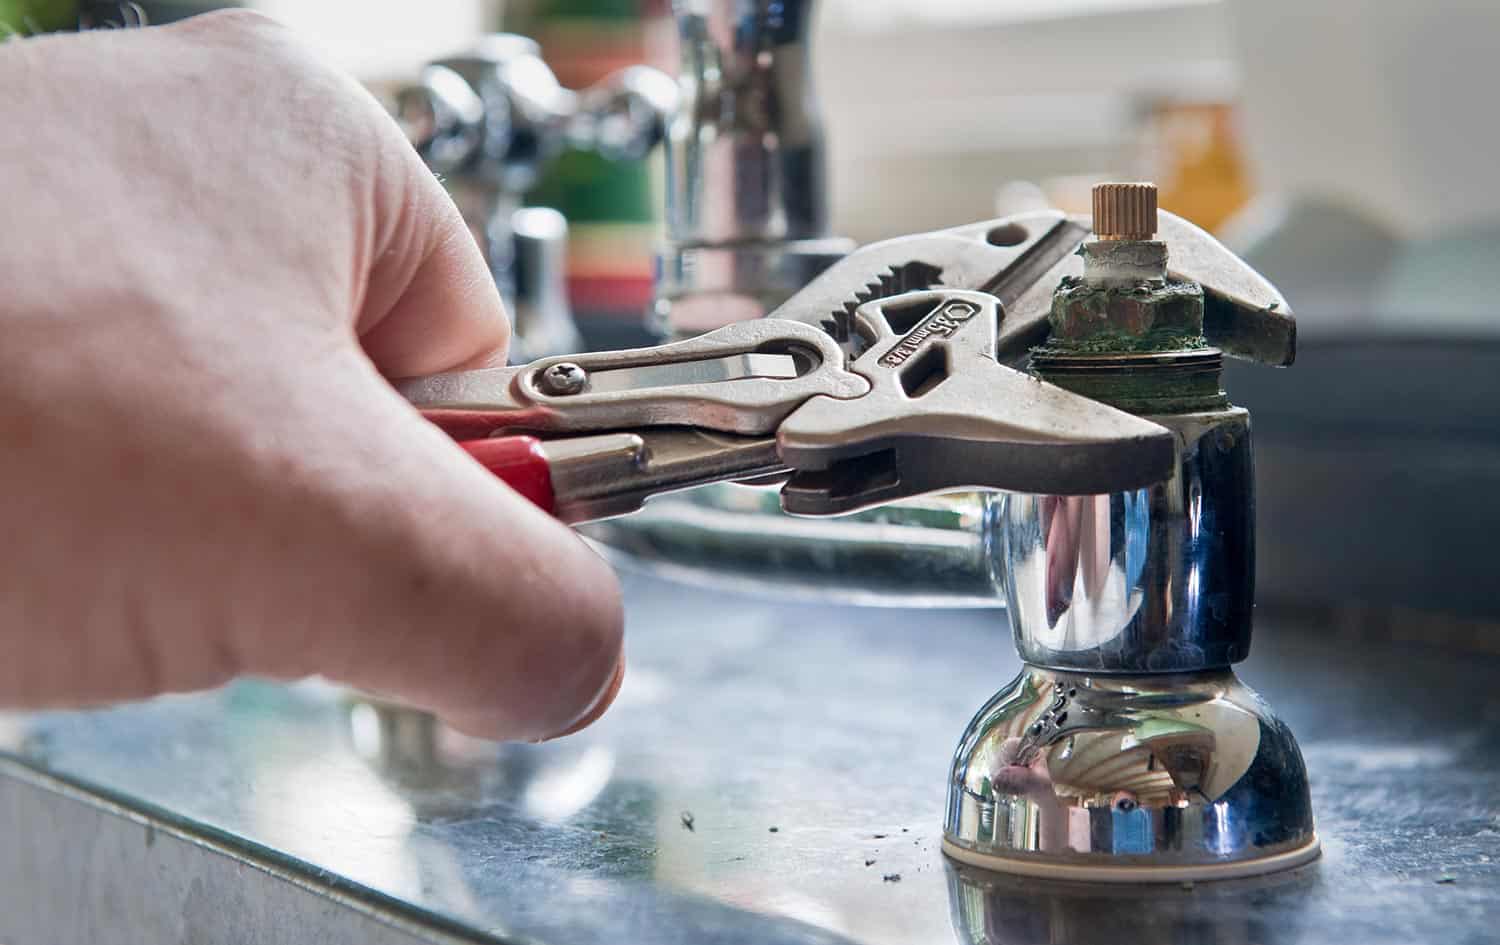  A plumber uses adjustable grips to remove a worn insert from a set of kitchen taps